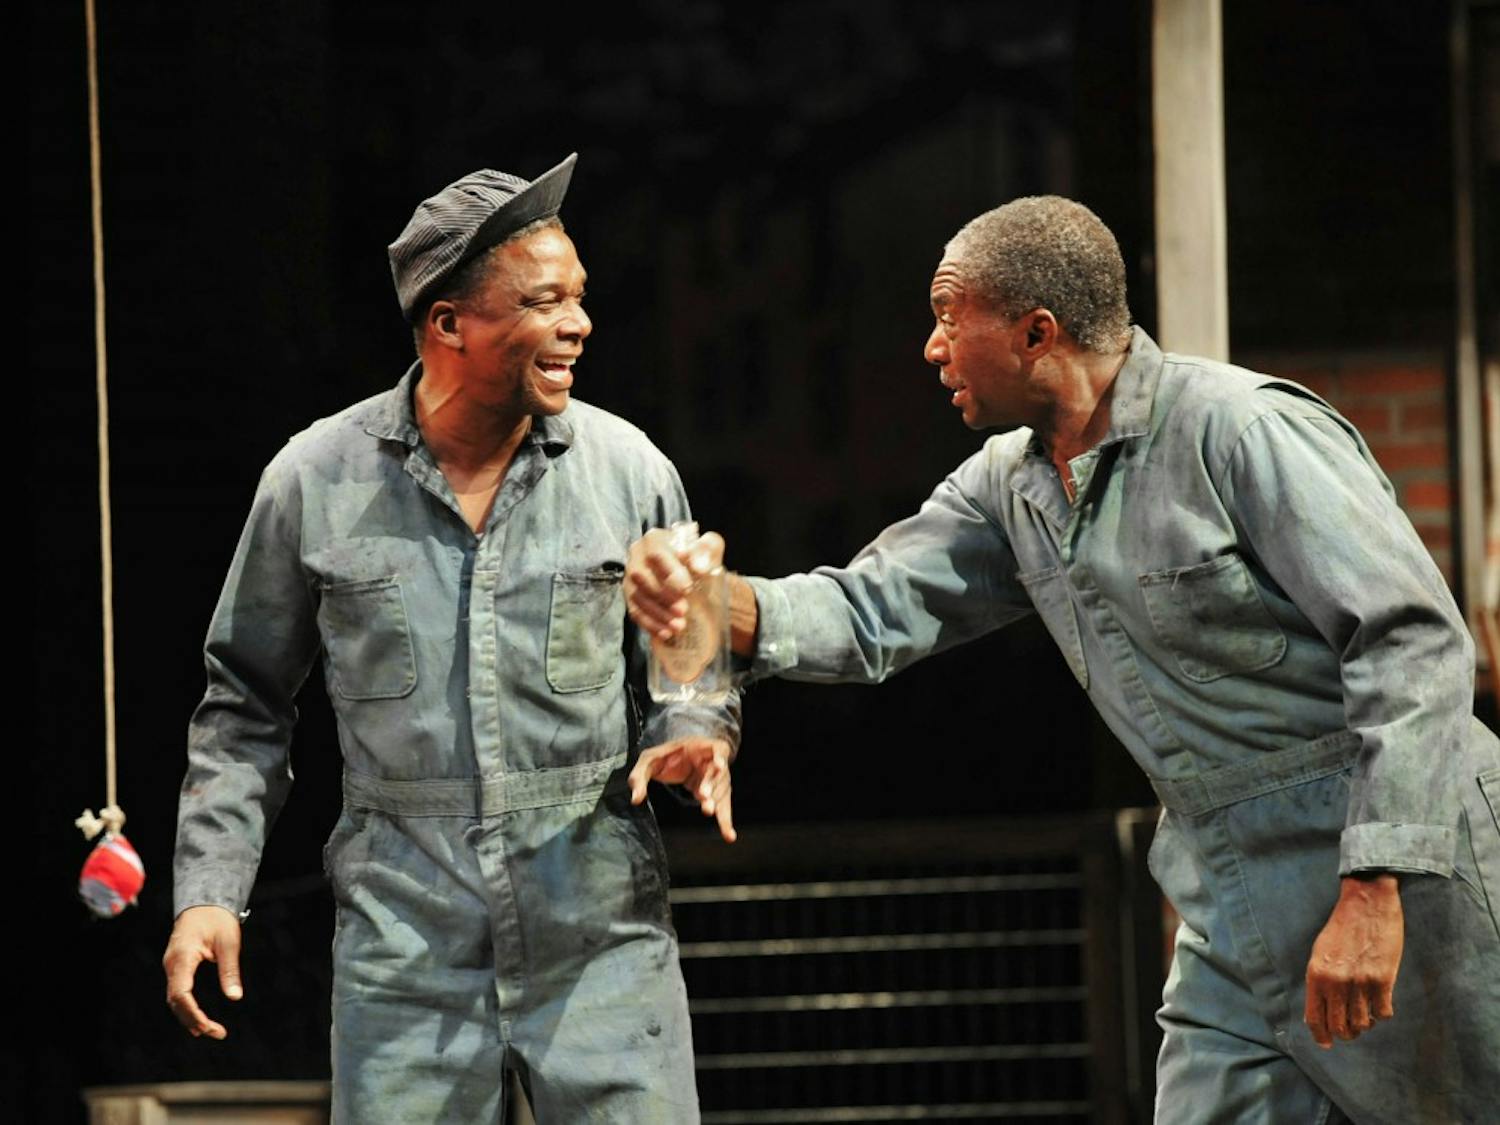 	For the first time in its 35 year history, PlayMakers Repertory Company presents a play by 20th century master, August Wilson. Check out some photos from &#8220;Fences,&#8221; the company&#8217;s charged and highly moving production, on stage through Nov. 14. All photos courtesy PlayMakers Repertory Company / Jon Gardiner. 